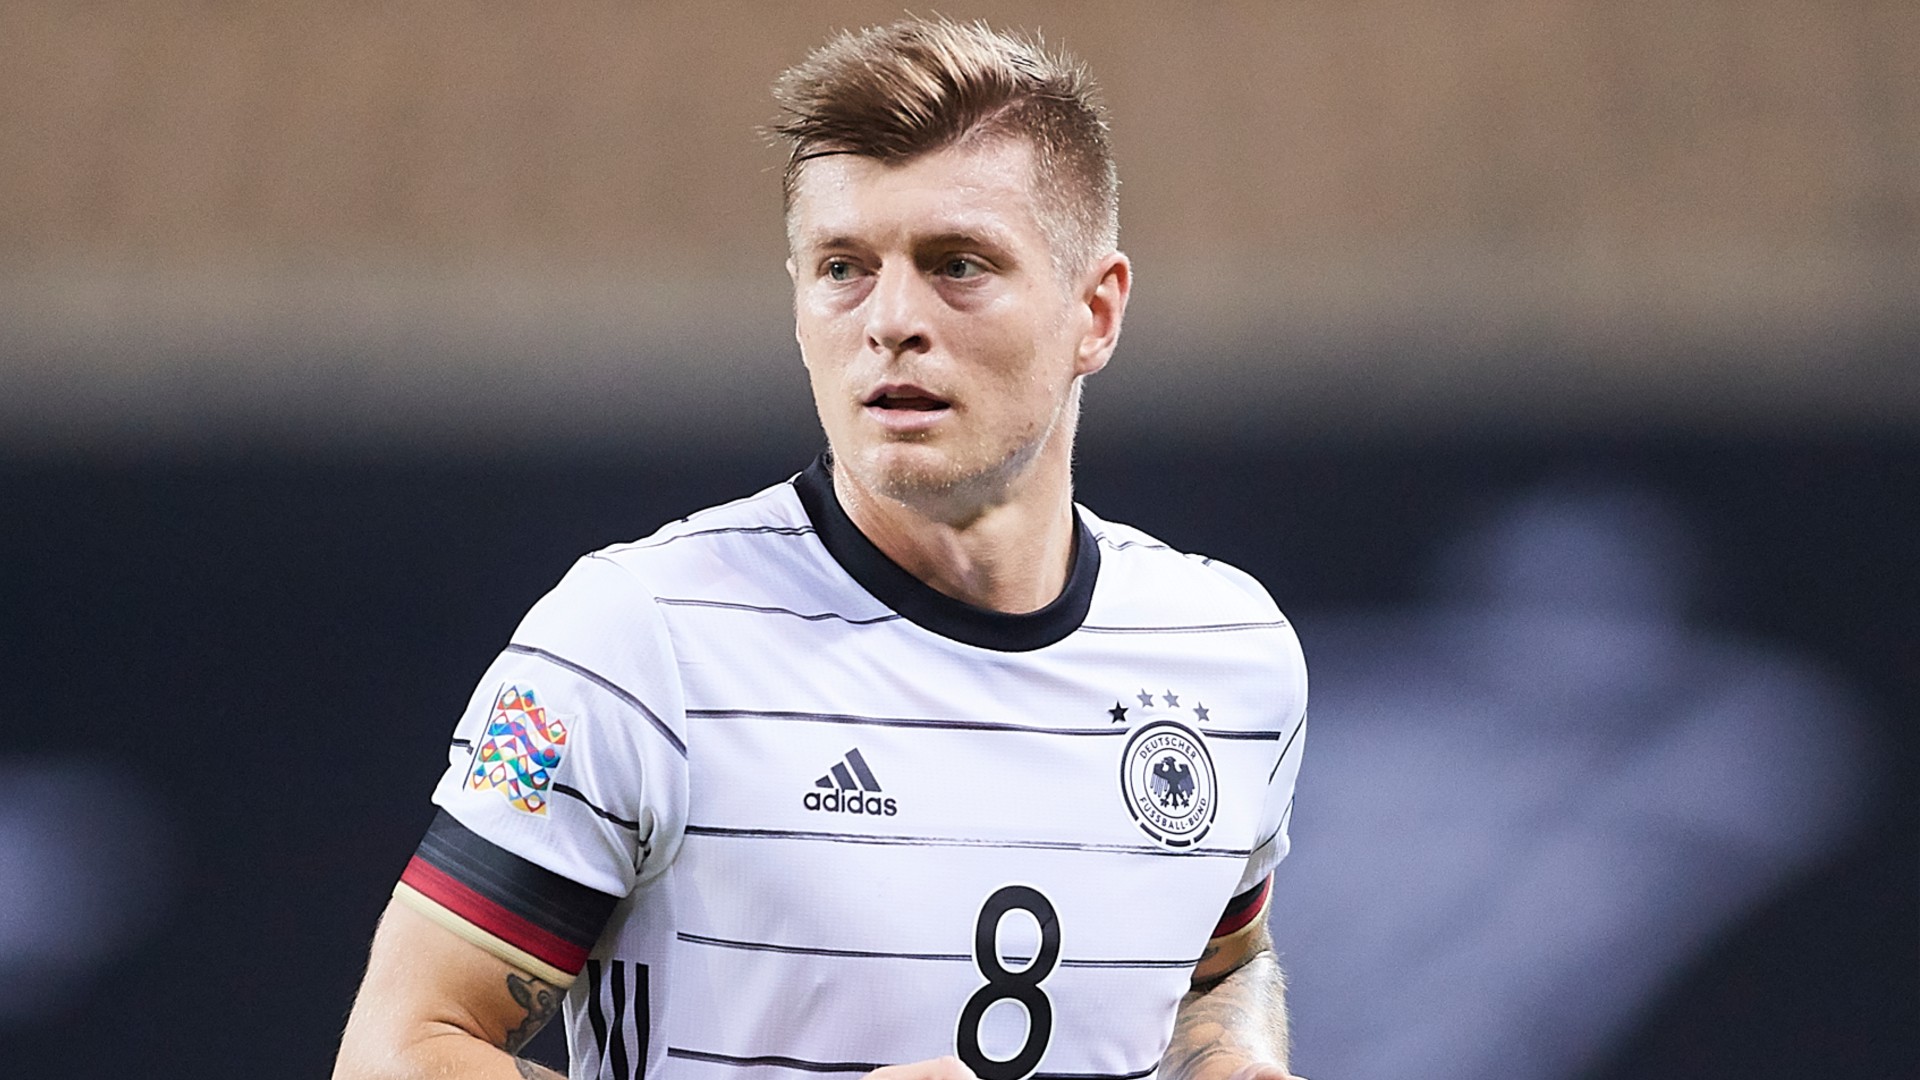 Video: Toni Kroos - Germany's generational standout